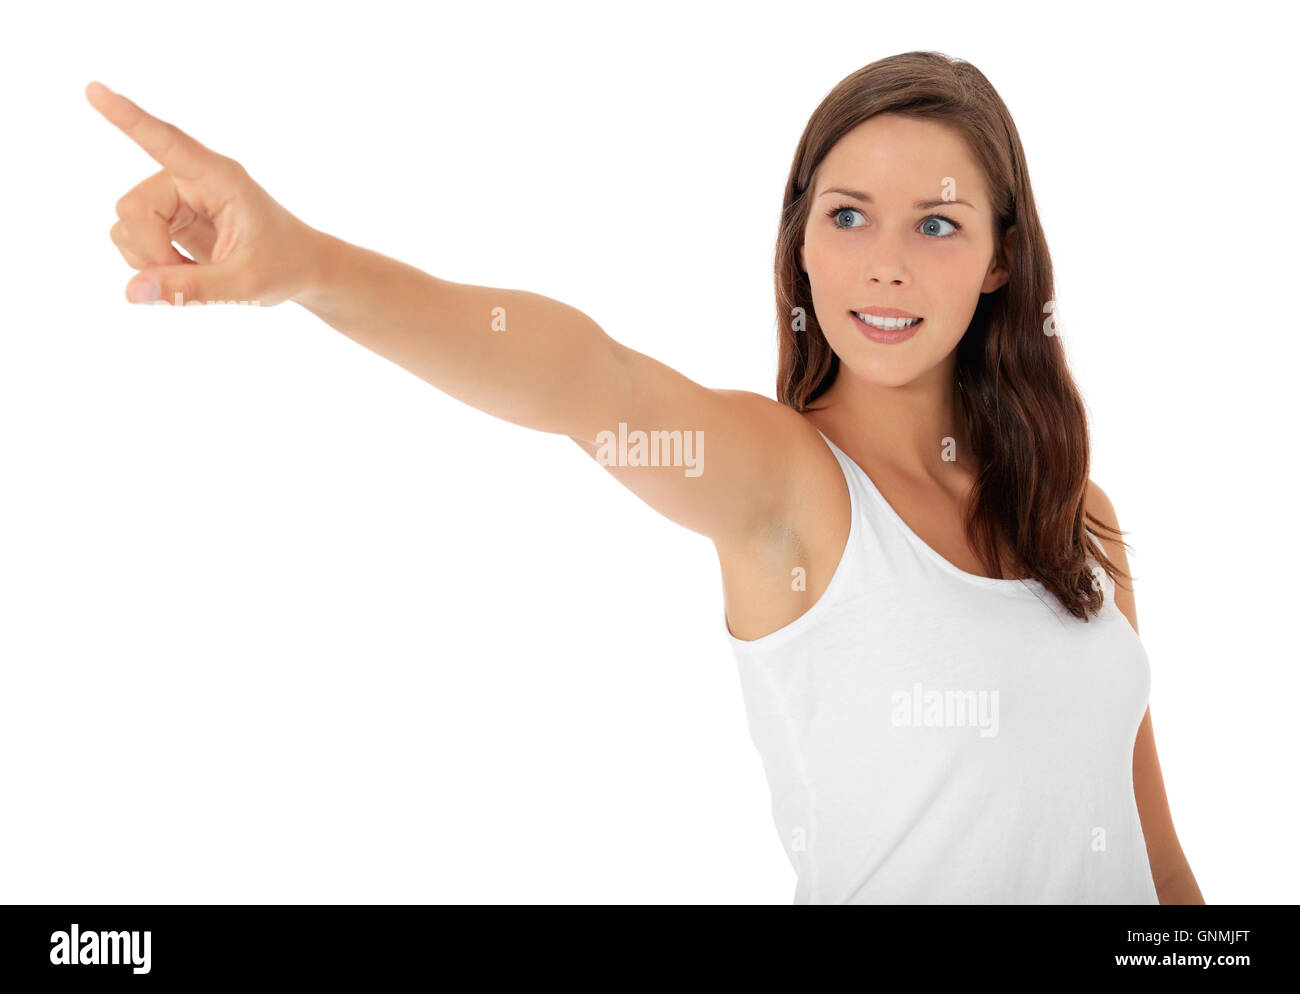 woman pointing to the side Stock Photo